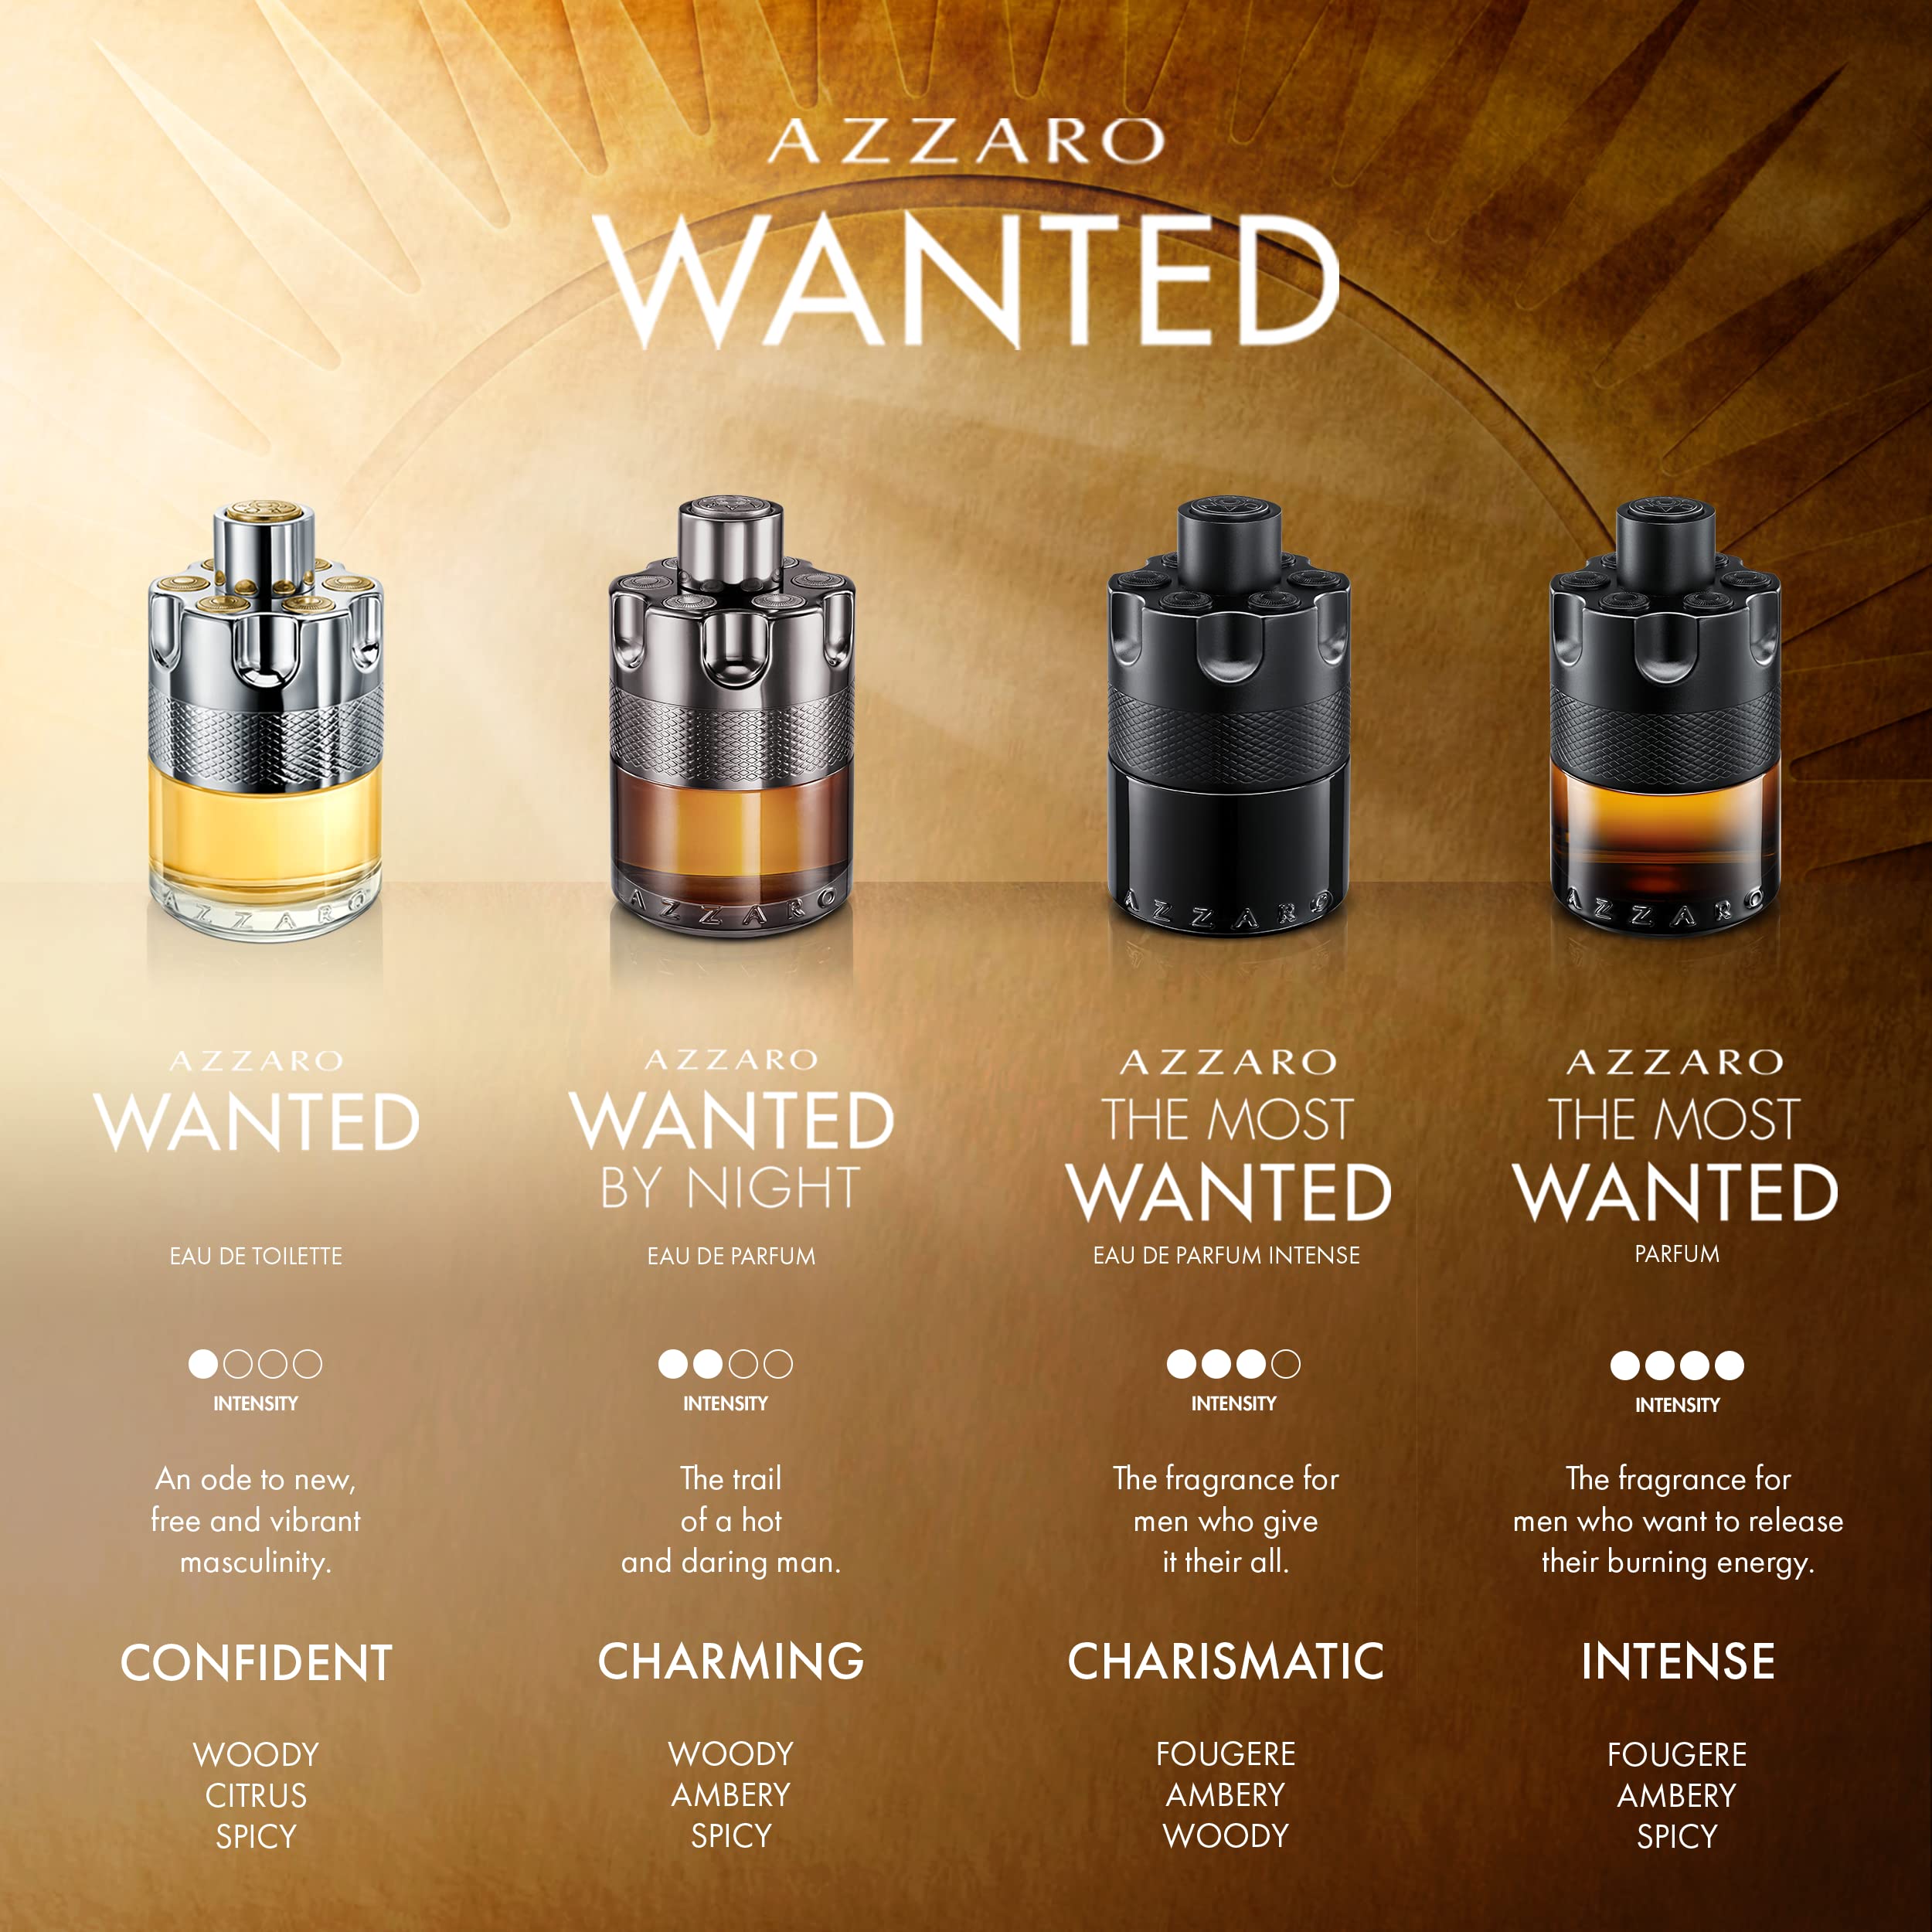 Azzaro The Most Wanted Parfum - Intense Mens Cologne - Spicy & Sensual Fragrance for Date - Lasting Wear - Irresistible Luxury Perfumes for Men